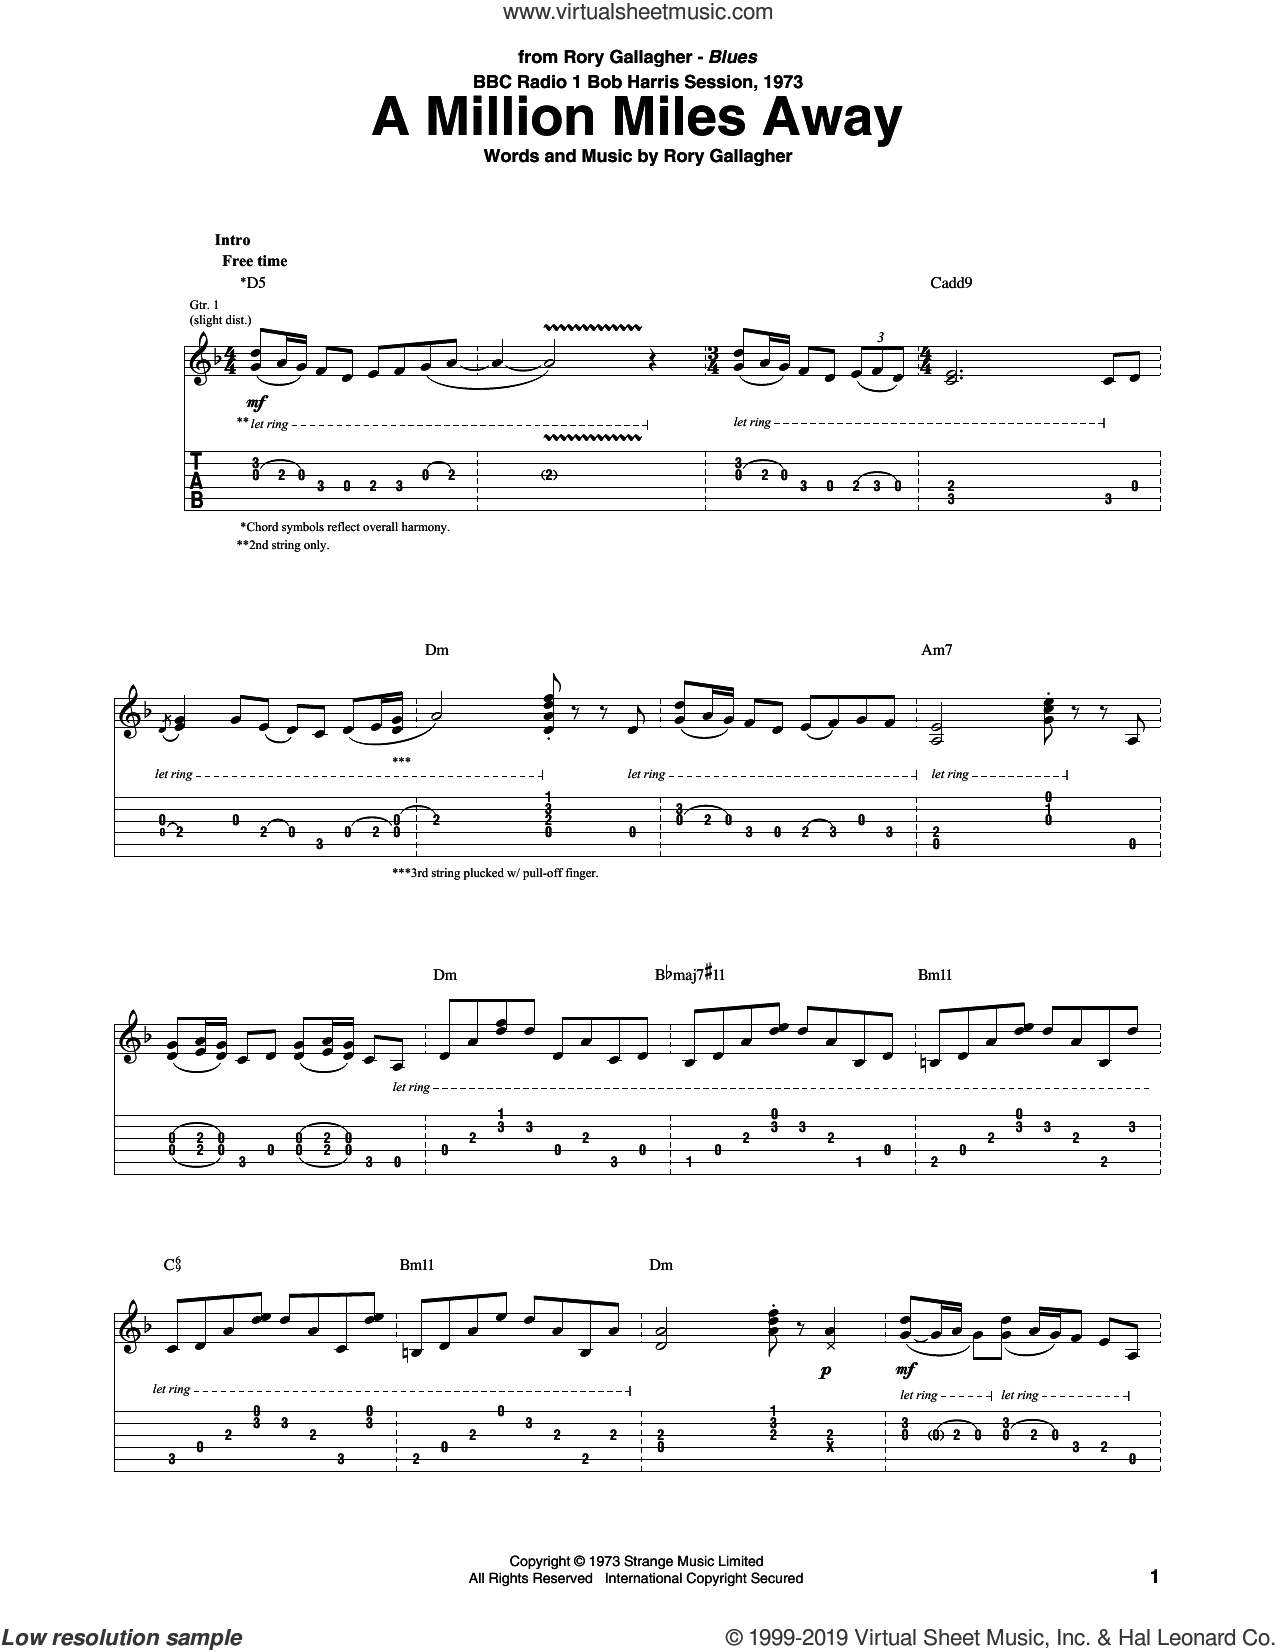 A Million Miles Away Sheet Music For Guitar Tablature V2 